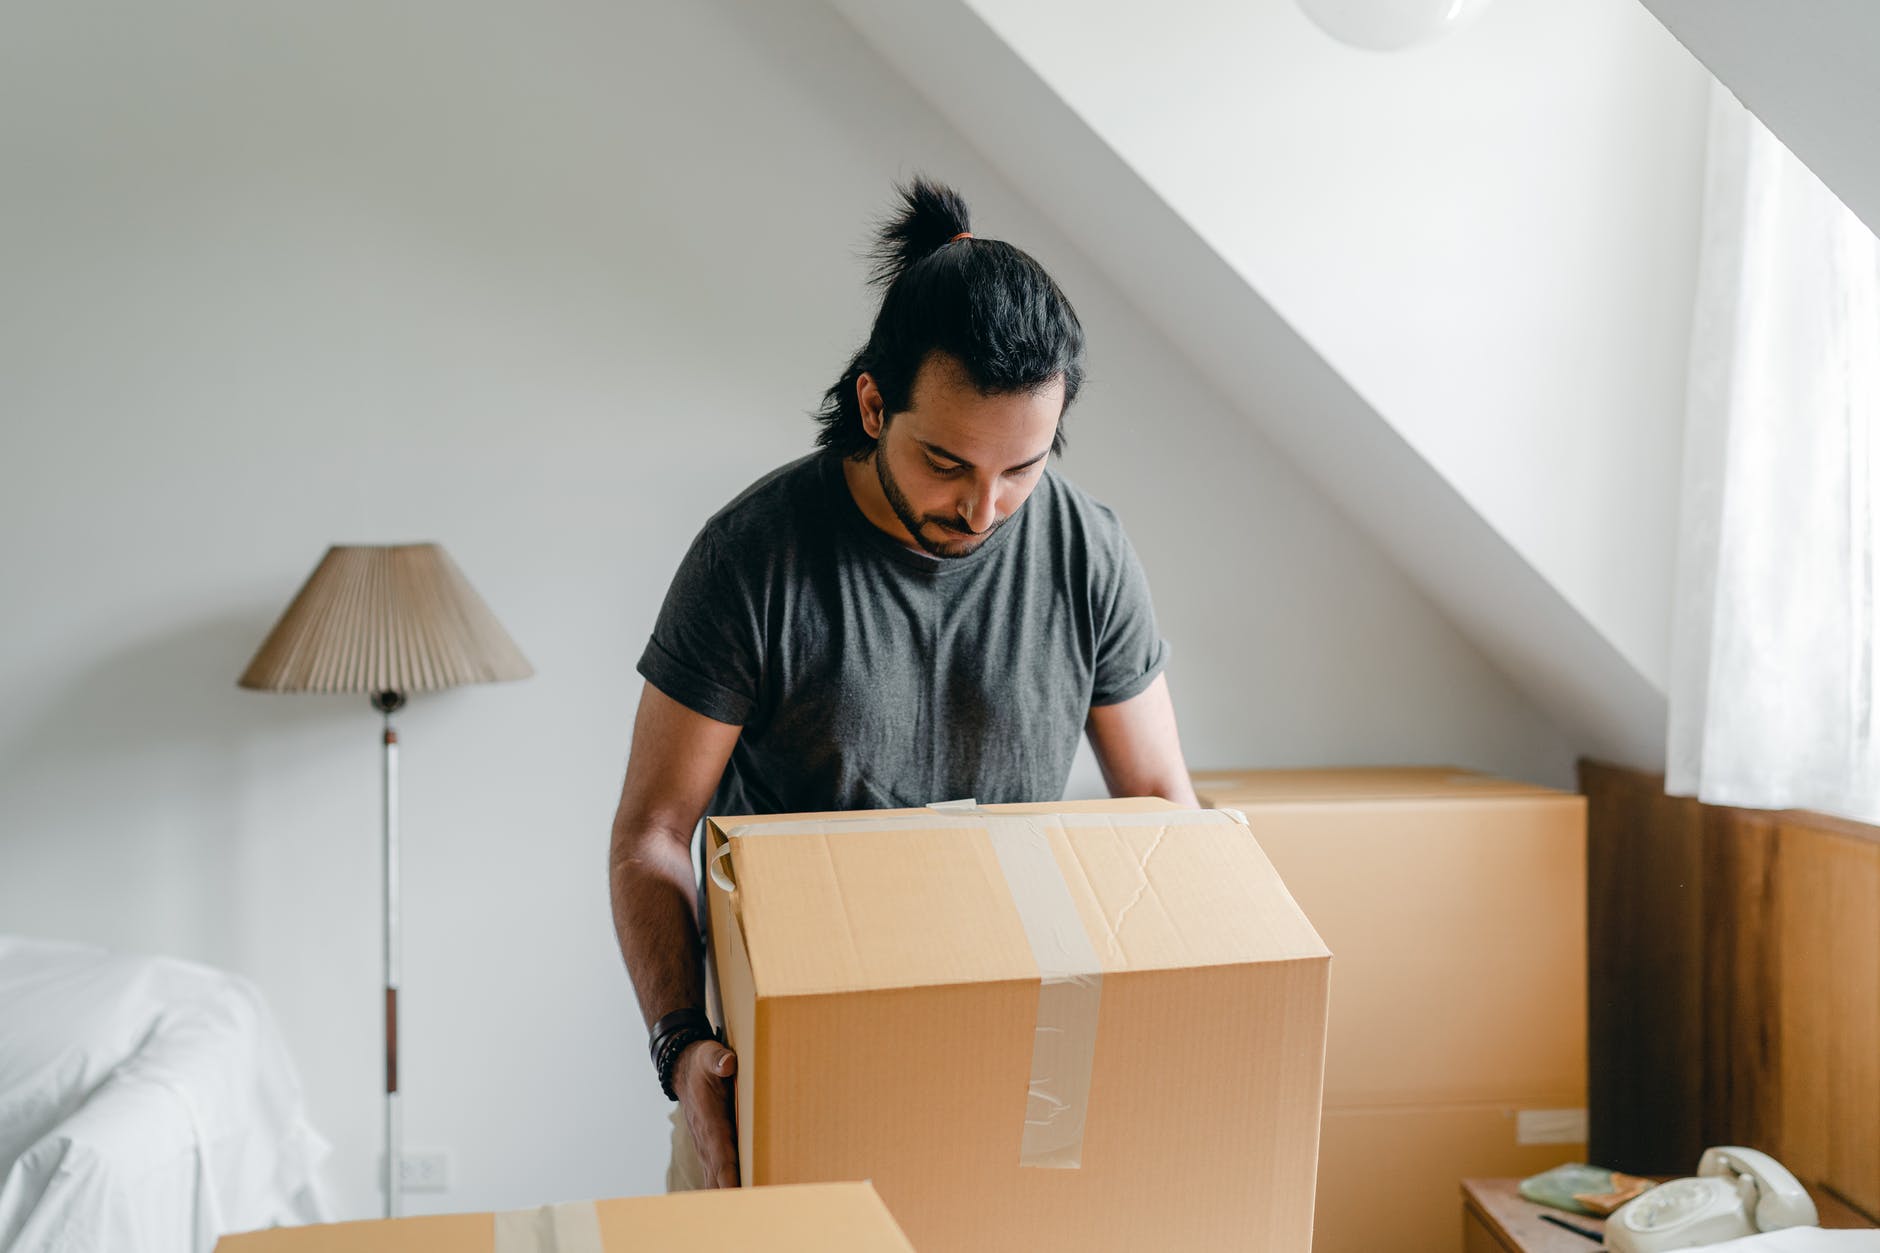 Abram moved their things downstairs where they used to be. | Source: Pexels